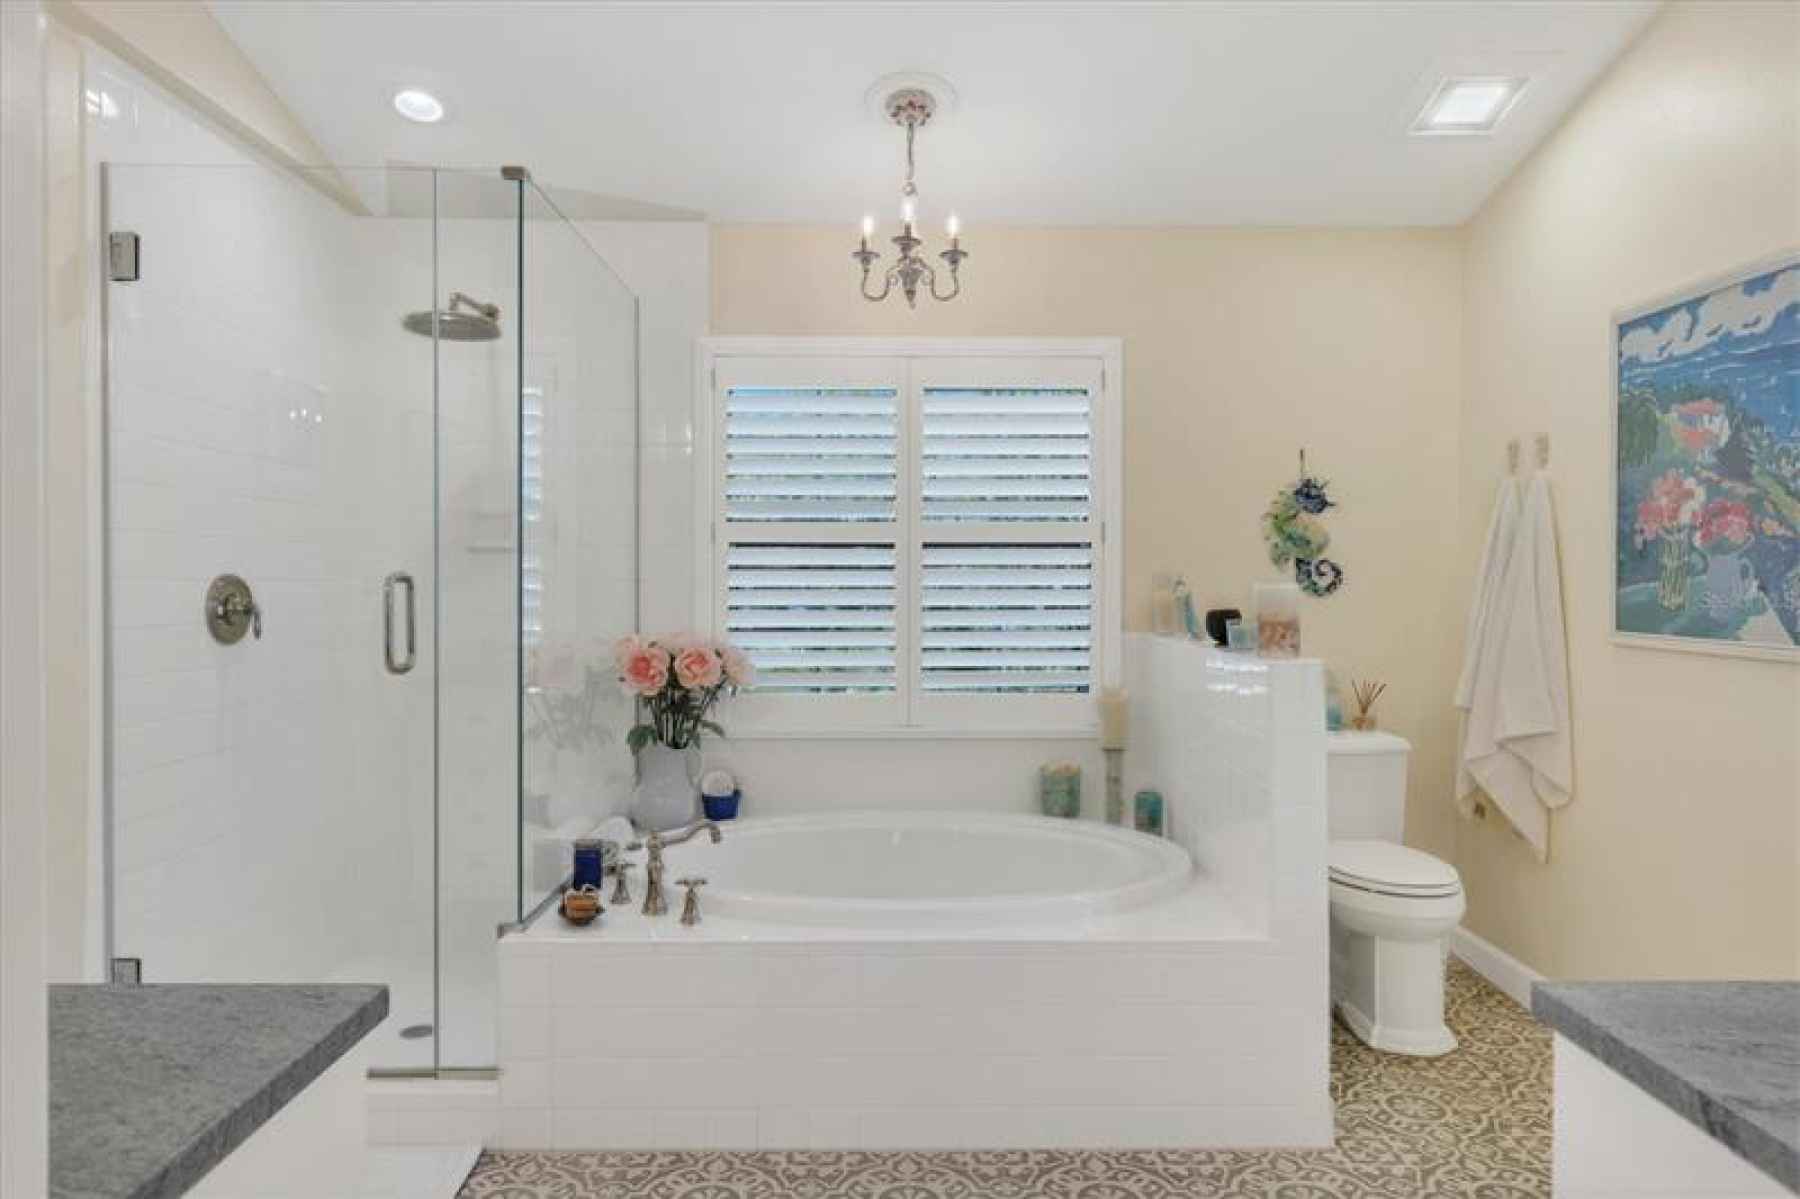 Remodeled owner's bath with frameless glass shower surround and soaking tub